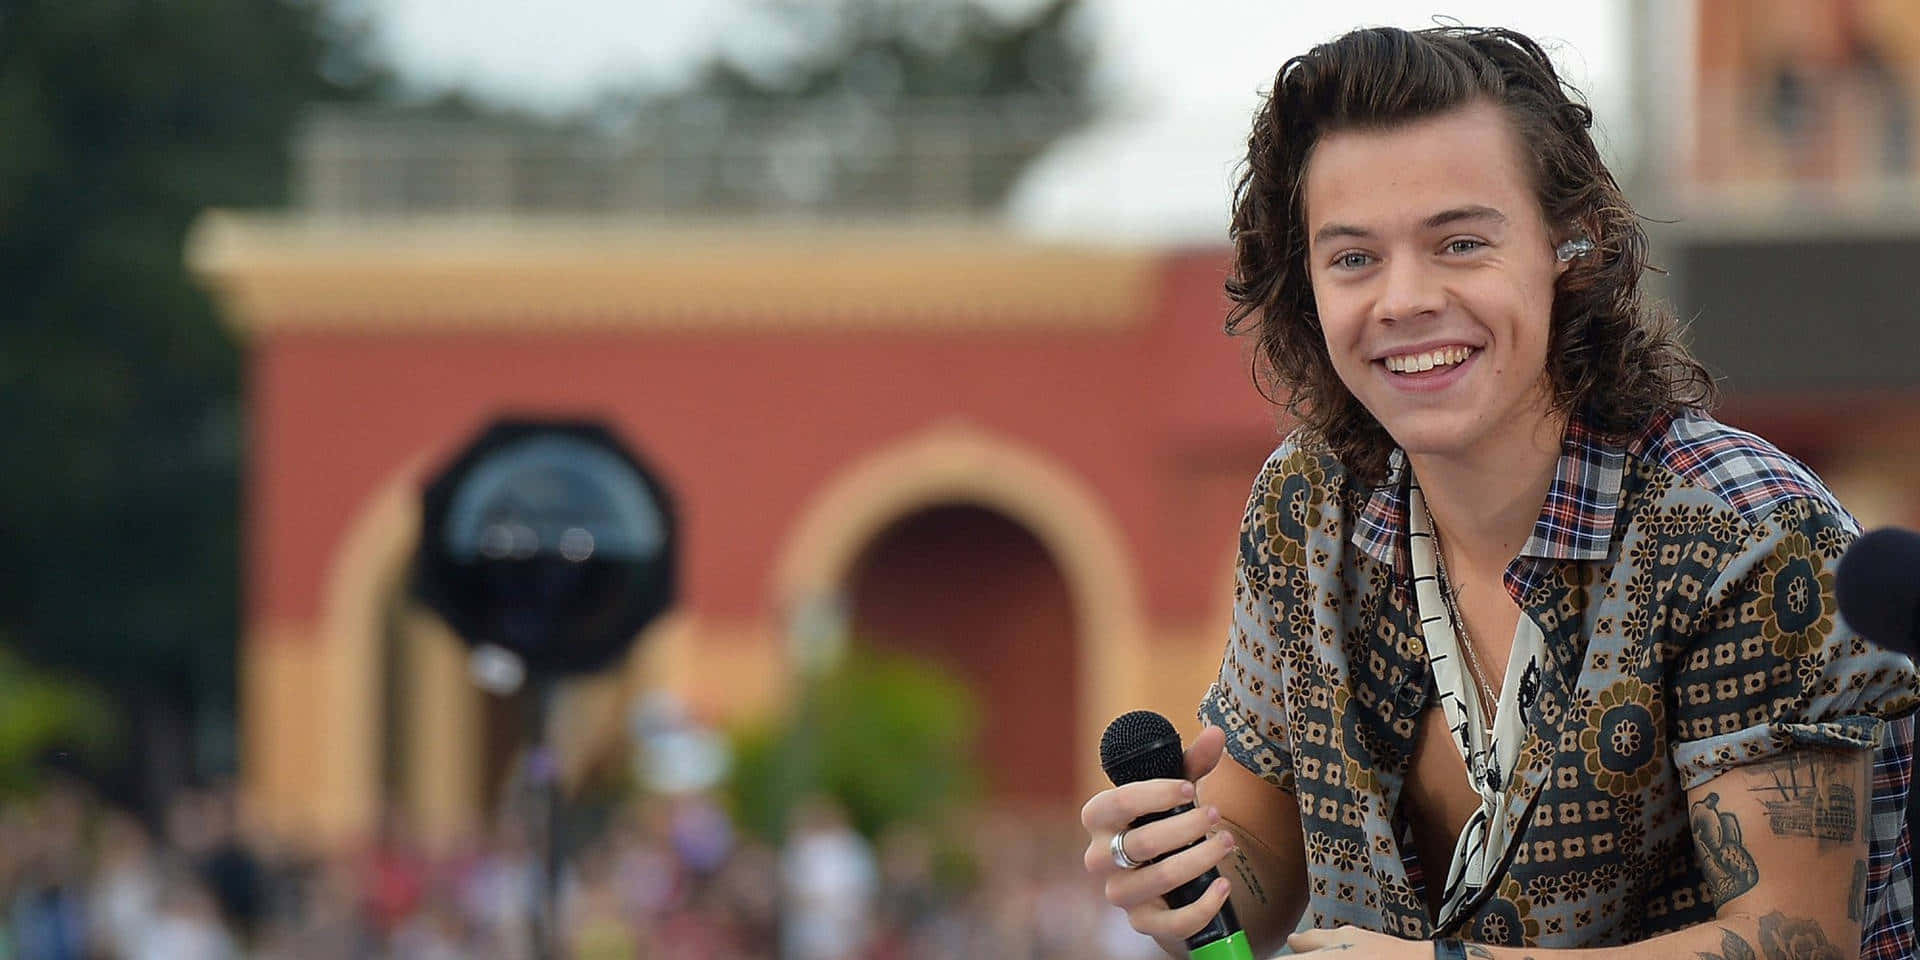 Harry Styles, the Singer-Songwriter Starring in His Own Show